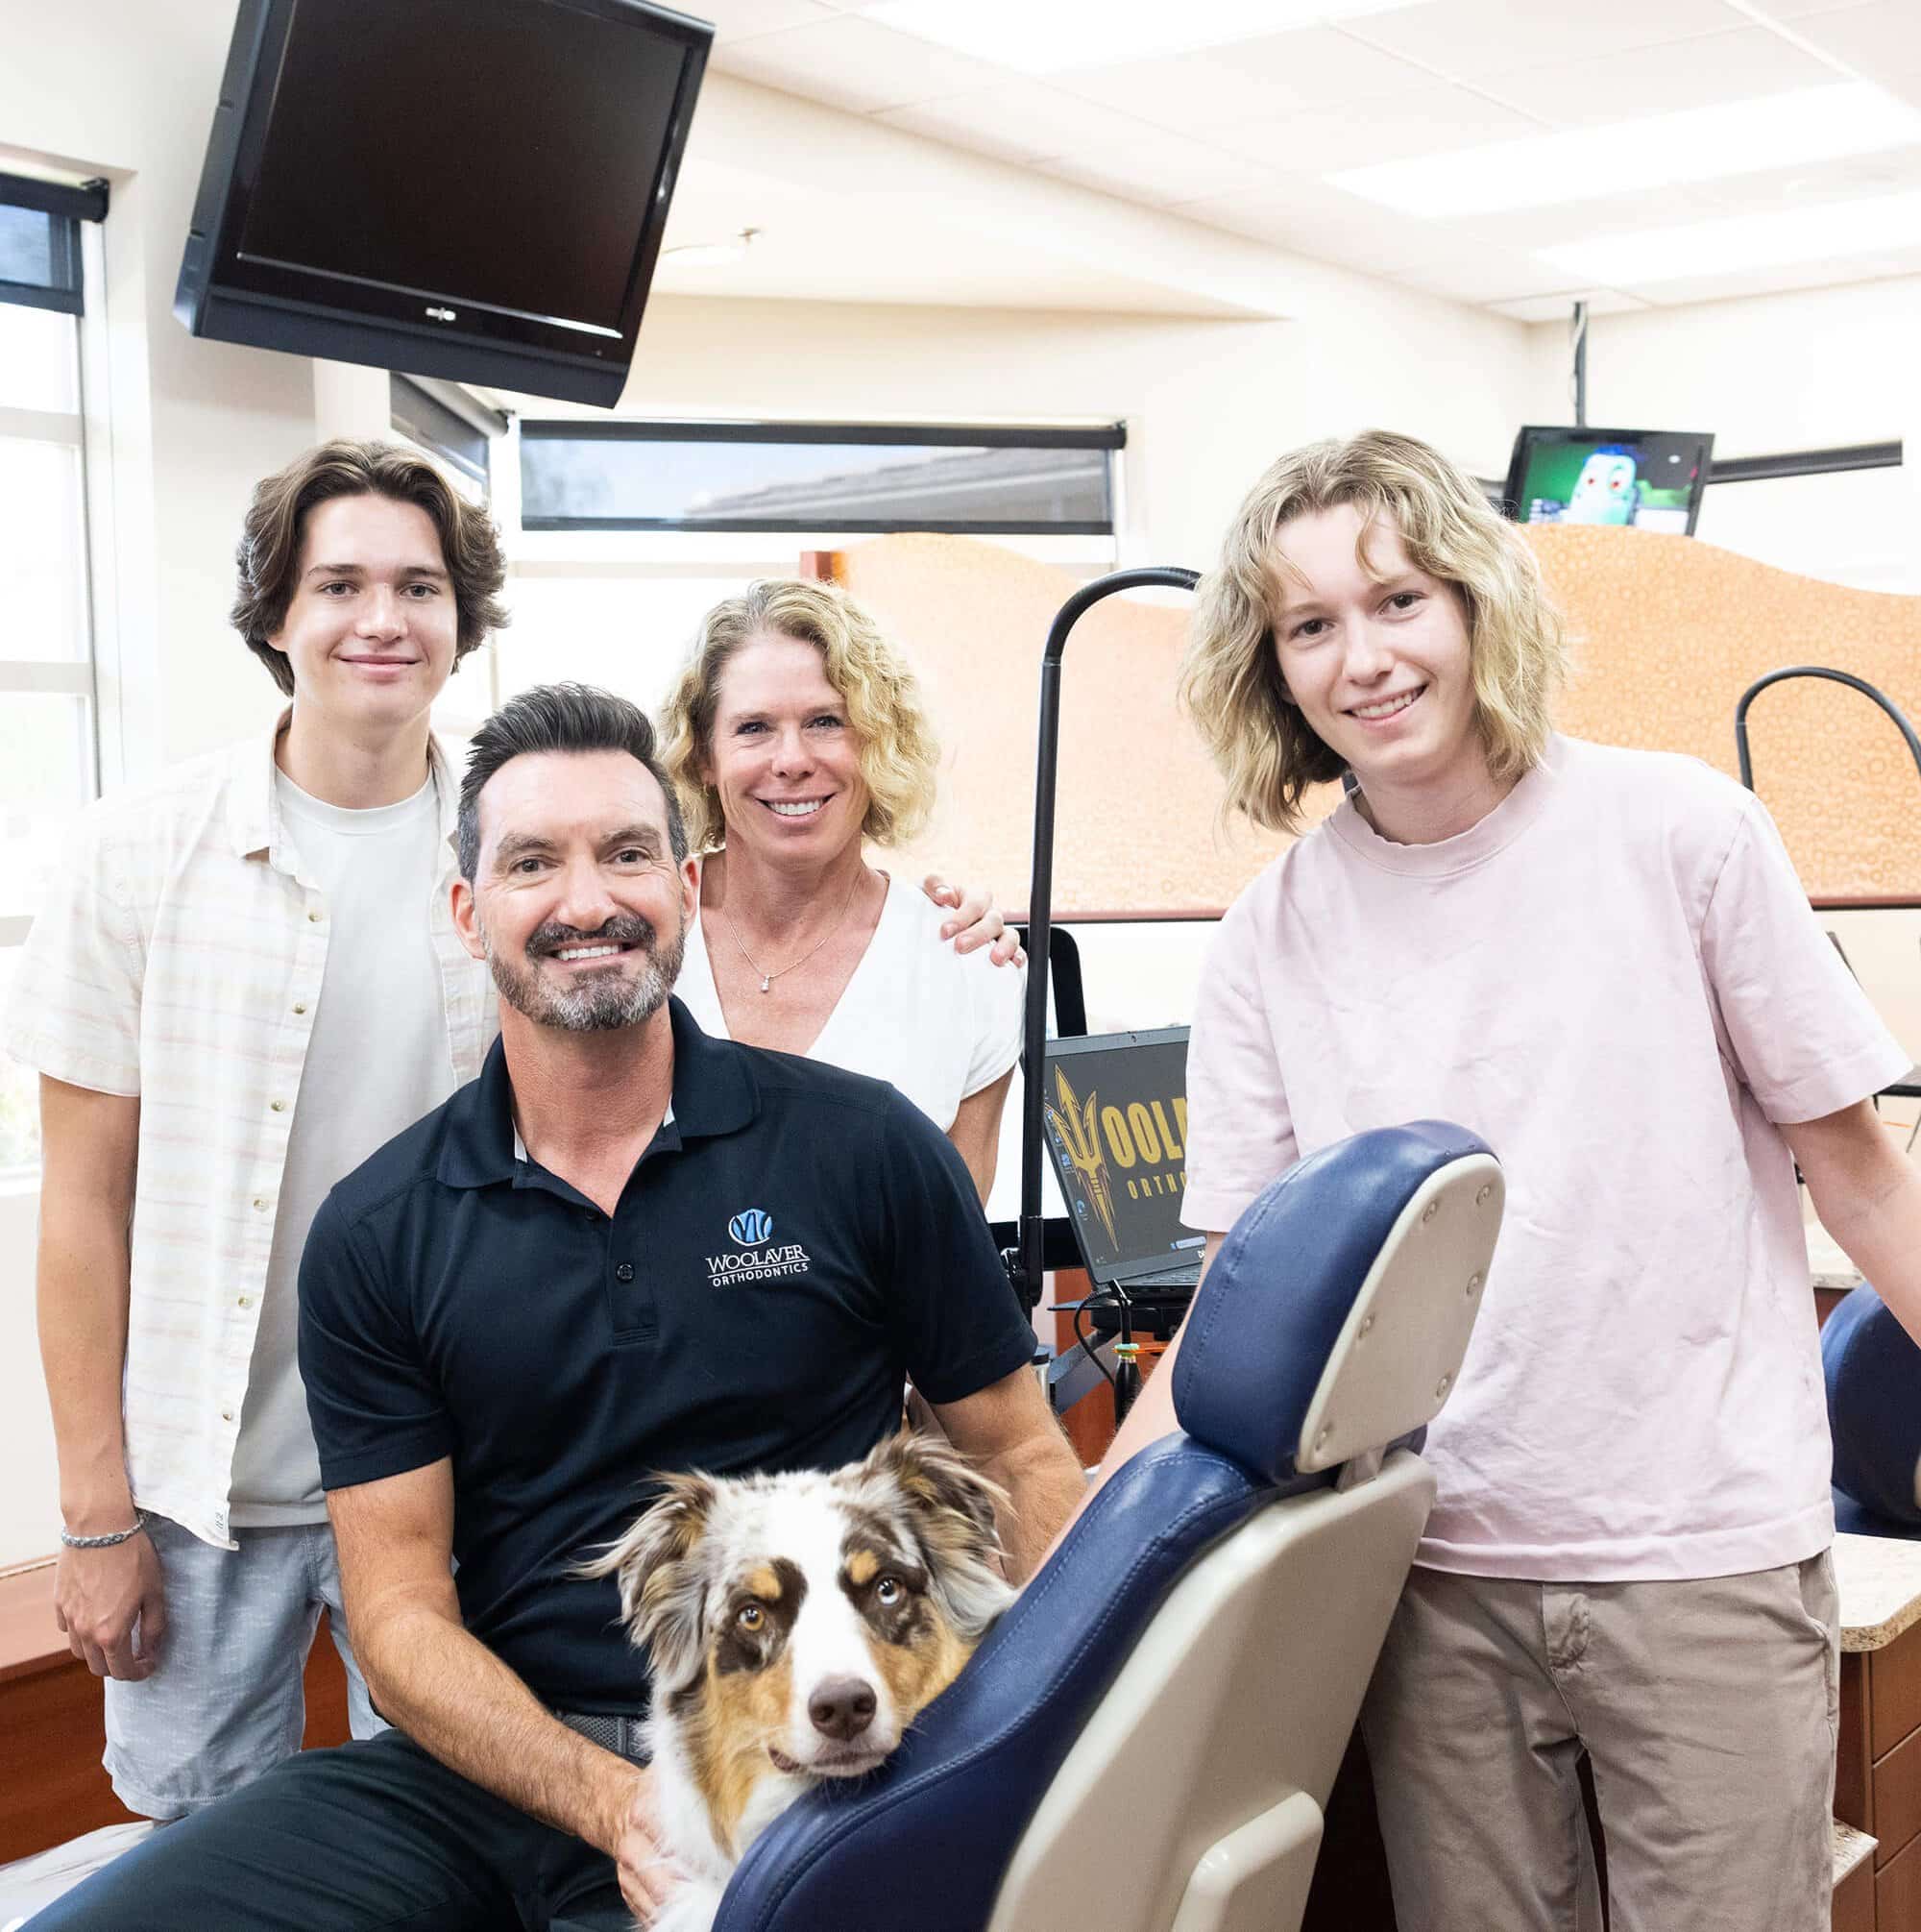 The team of four Orthodontists from Woolaver Orthodontics in Phoenix, all smiling and one of them holds a dog in his lap.